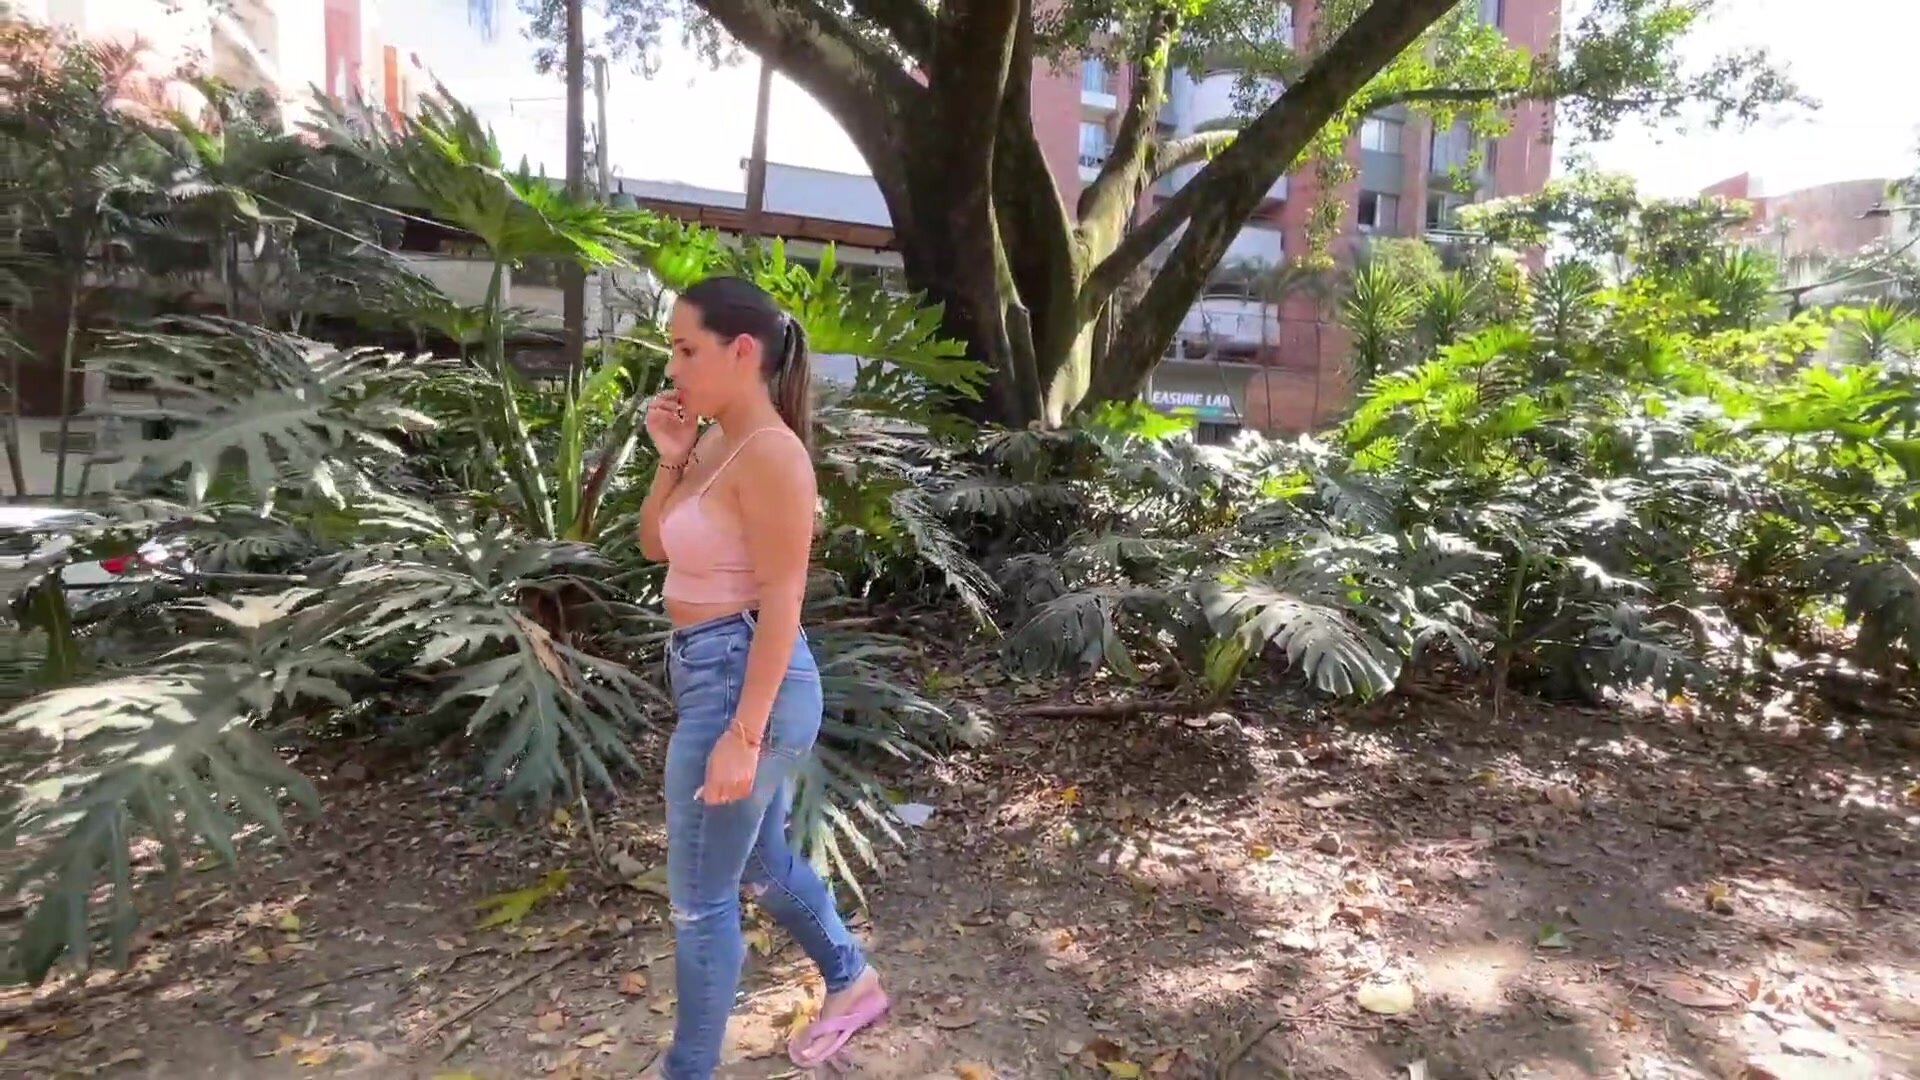 She pees in her jeans in a park